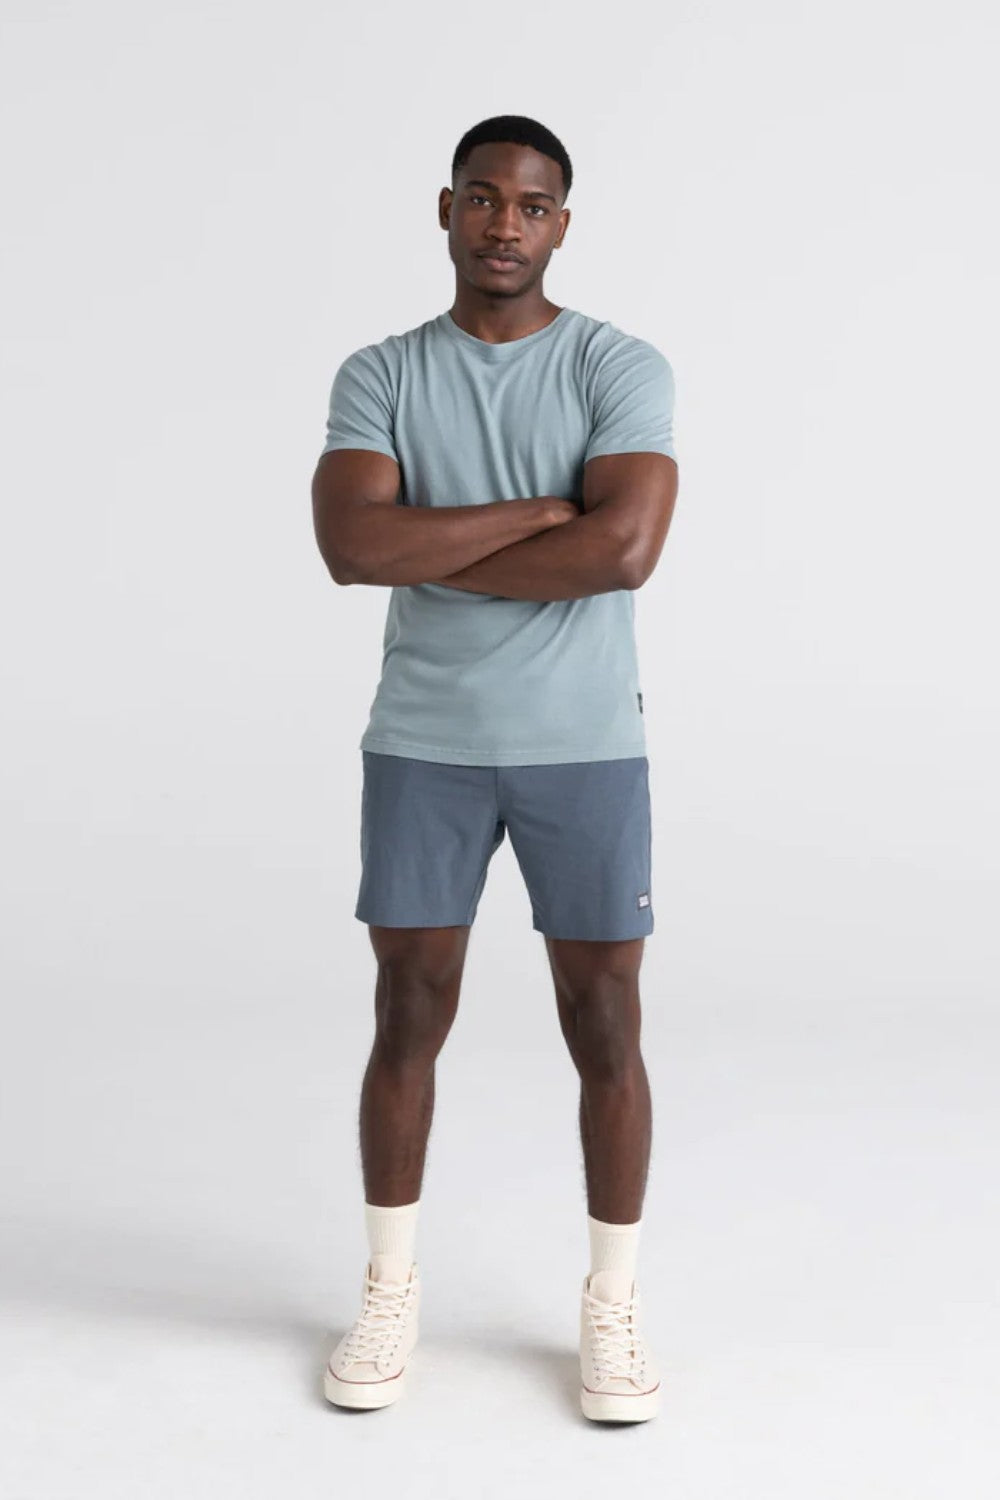 These 2N1 performance shorts combine a slim fit liner with a standard fit shell. Enjoy unrestricted movement in this versatile style. Working out to hanging out. With Sport 2 Life's integrated Sport Mesh liner and built-in BallPark Pouch, experience increased breathability and support.